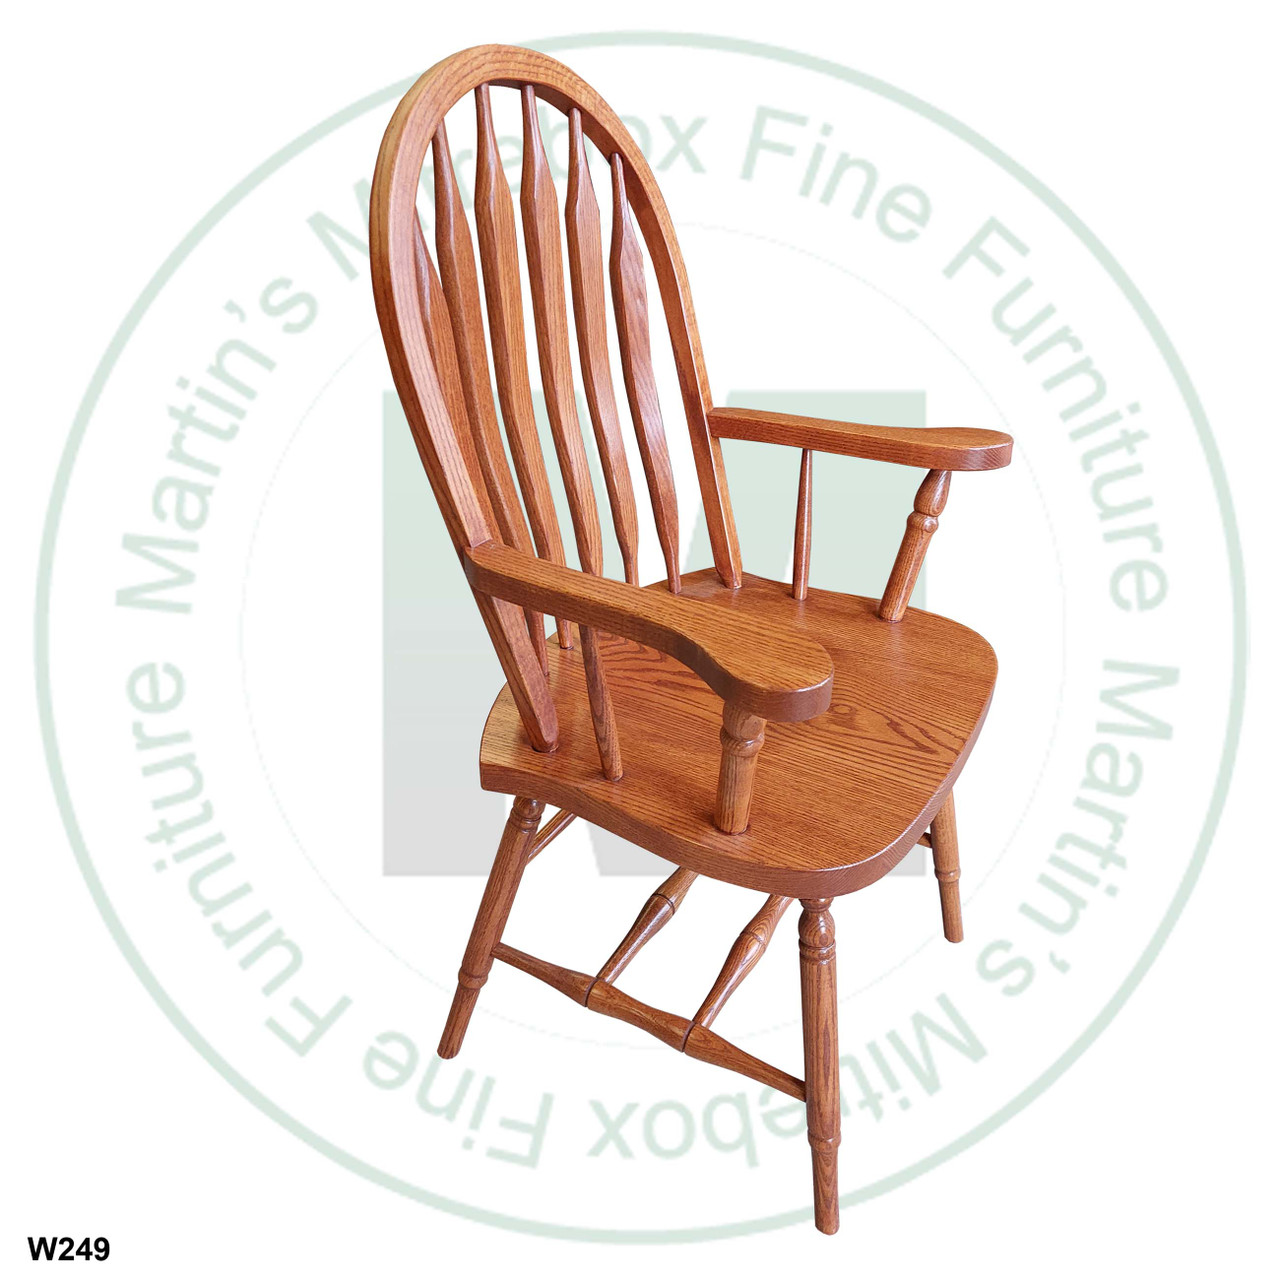 Maple Bent Arrow Arm Chair With Wood Seat